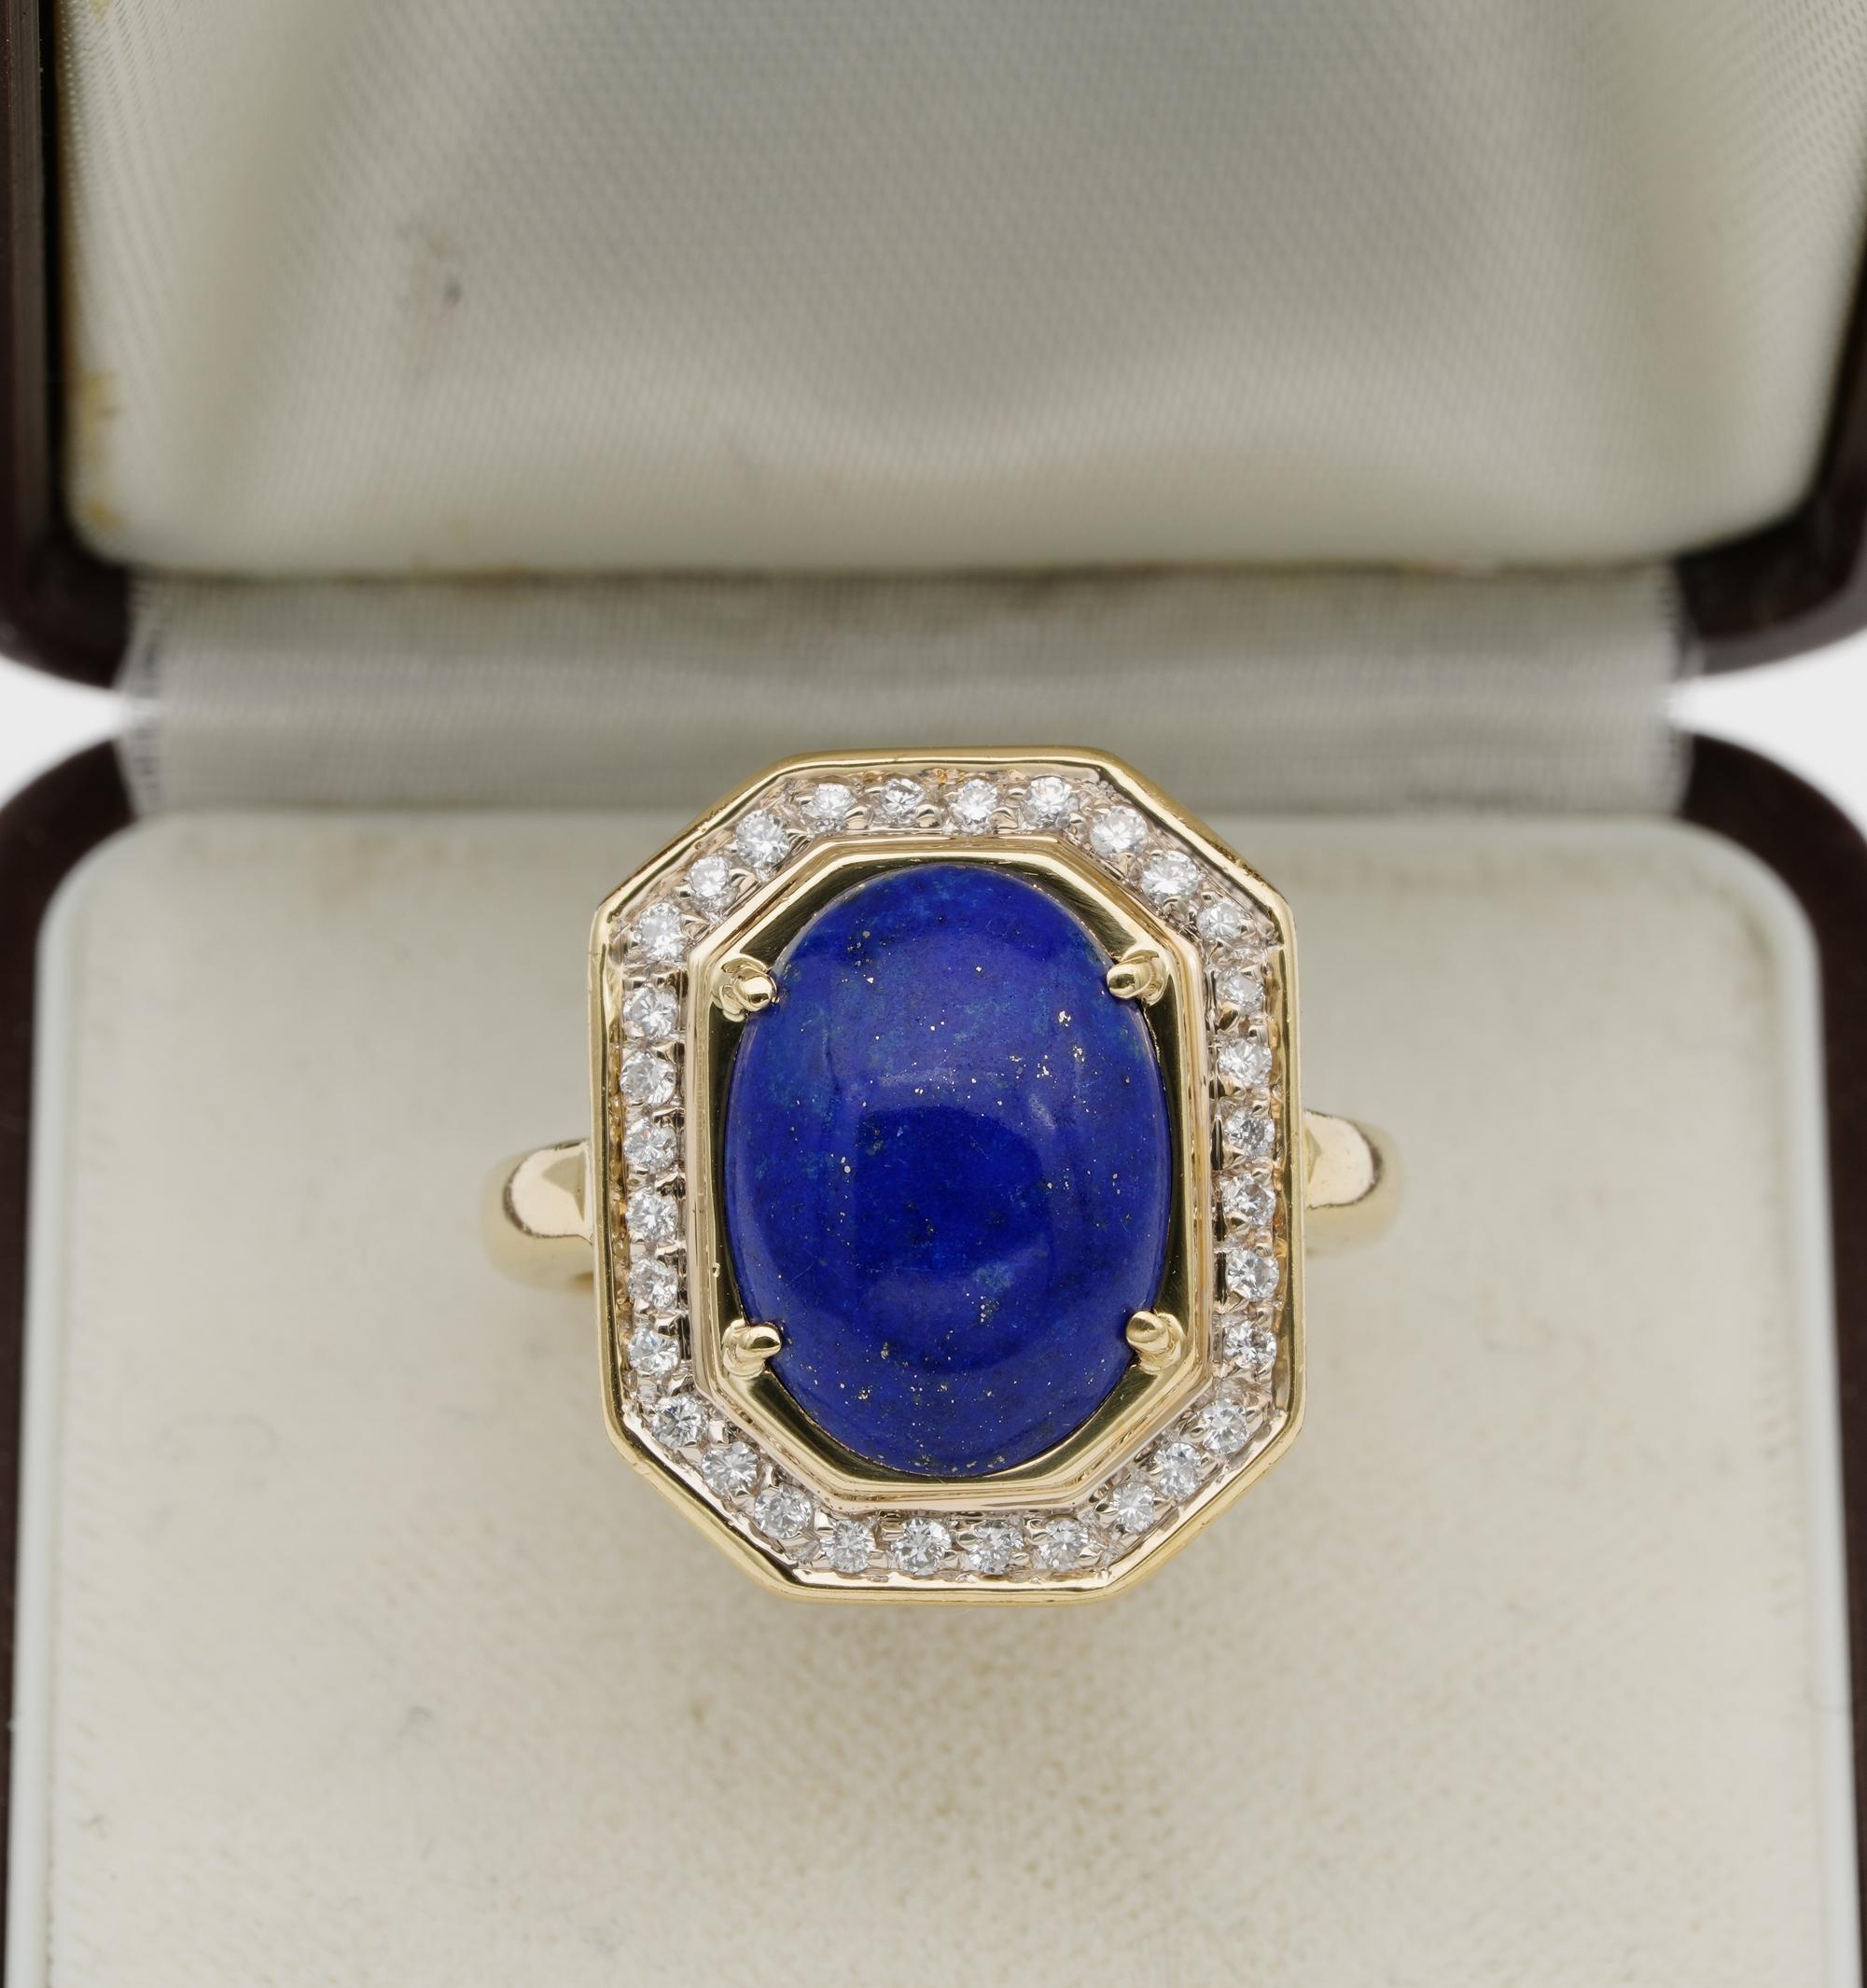 This superb 1970 ca ring has been hand crafted of solid 18 Kt gold, Italian origin
Unique sturdy design and finest workmanship with detailed back work and elegant octagonal shaped head
Centrally set with an oval cabochon Lapis stone prizing richl